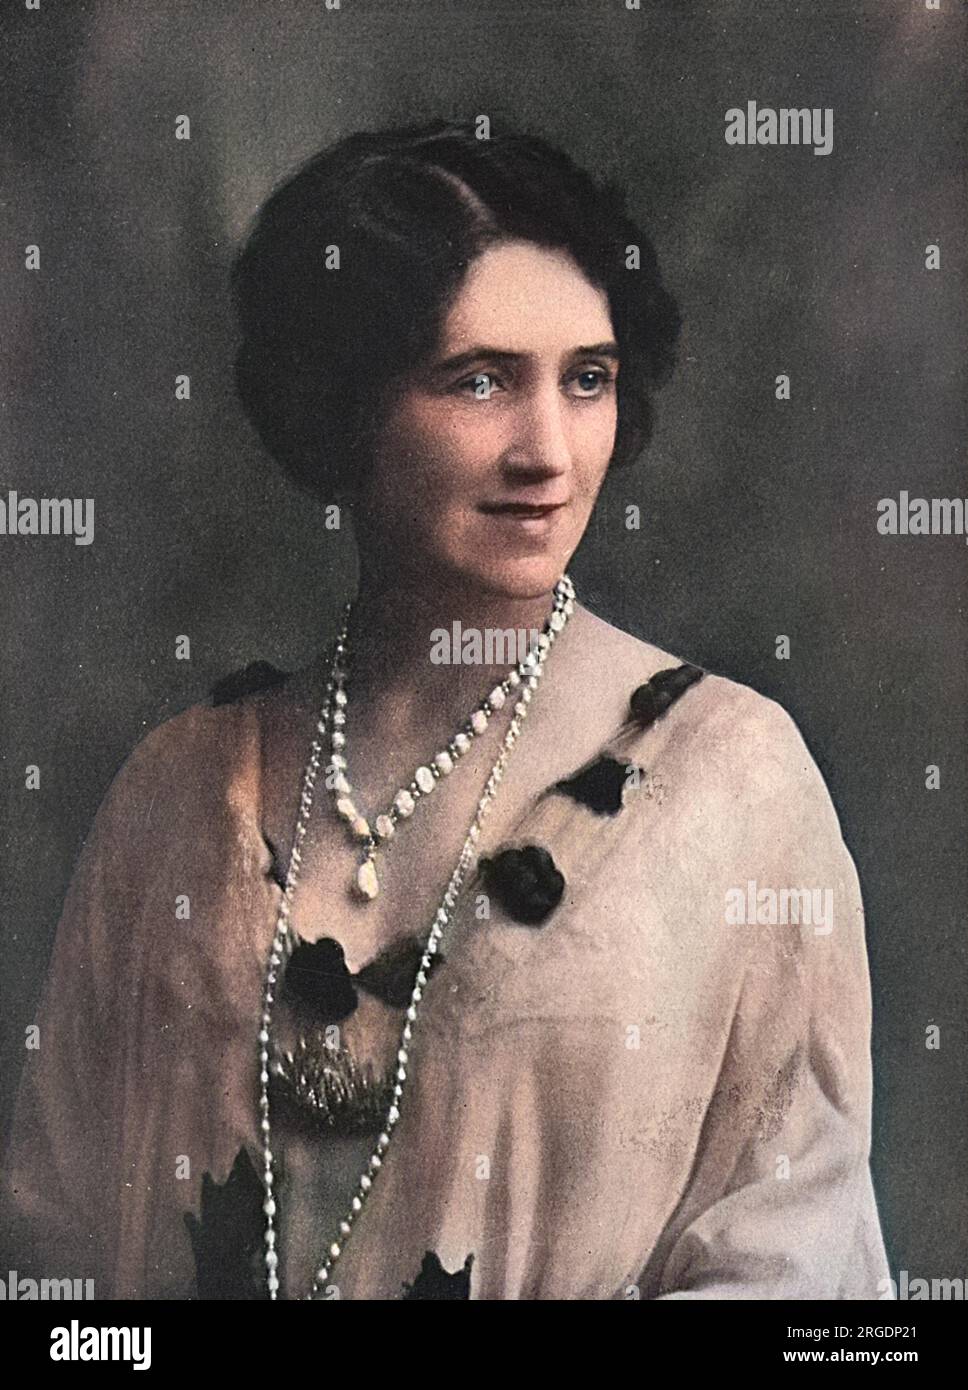 Pamela Bulwer-Lytton (née Chichele-Plowden), Countess of Lytton, who ran her own hospital for wounded soldiers during the First World War and organised a number of entertainments and enterprises in connection with raising money for war funds. Stock Photo